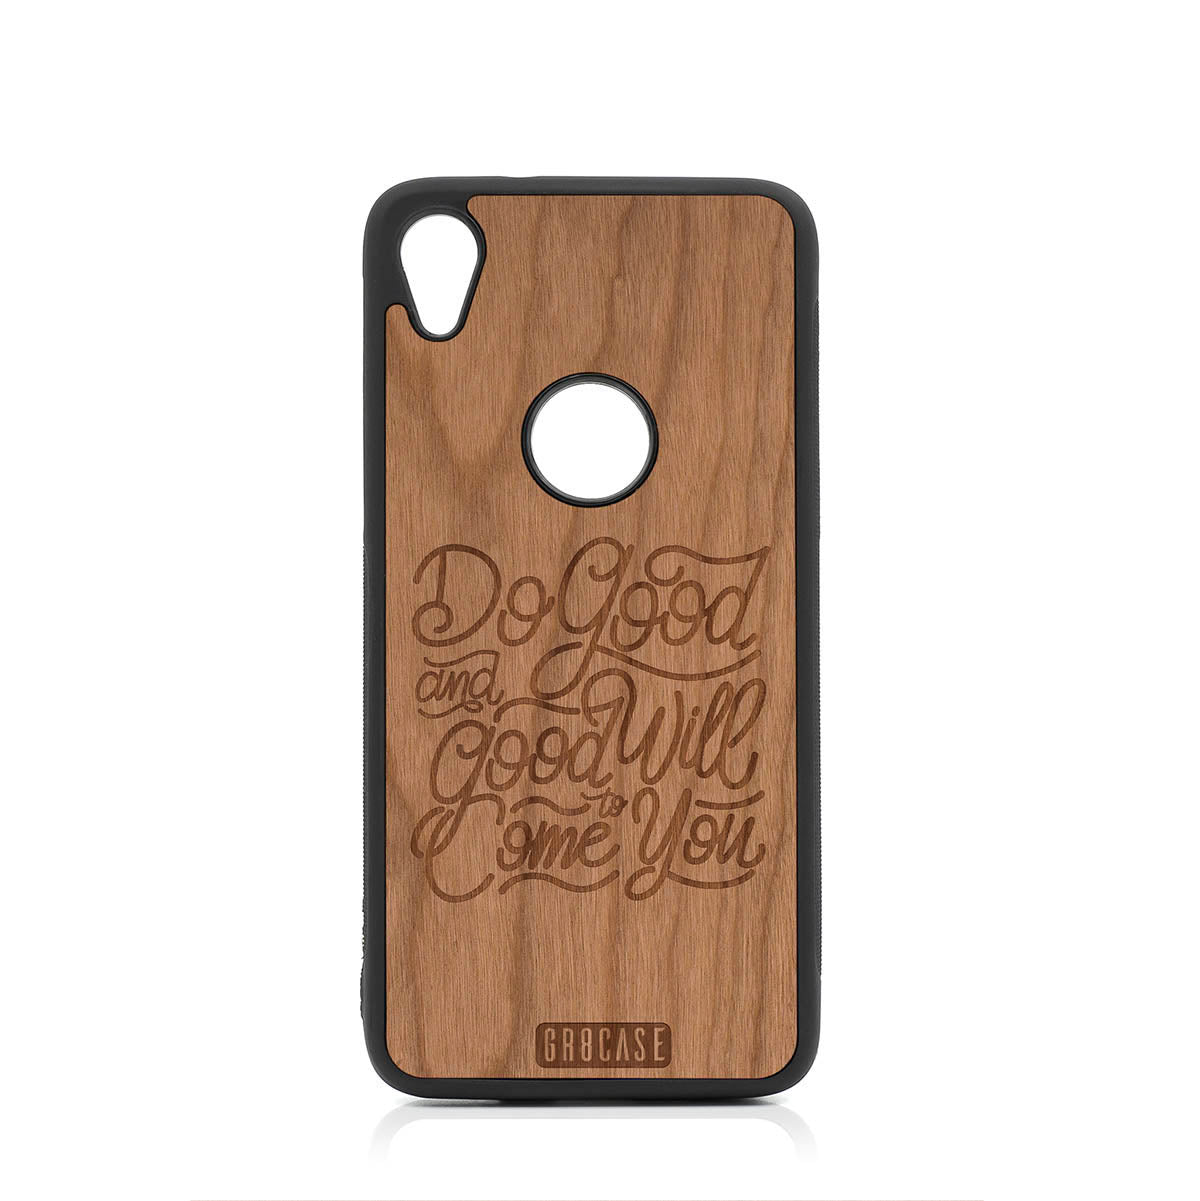 Do Good And Good Will Come To You Design Wood Case For Moto E6 by GR8CASE